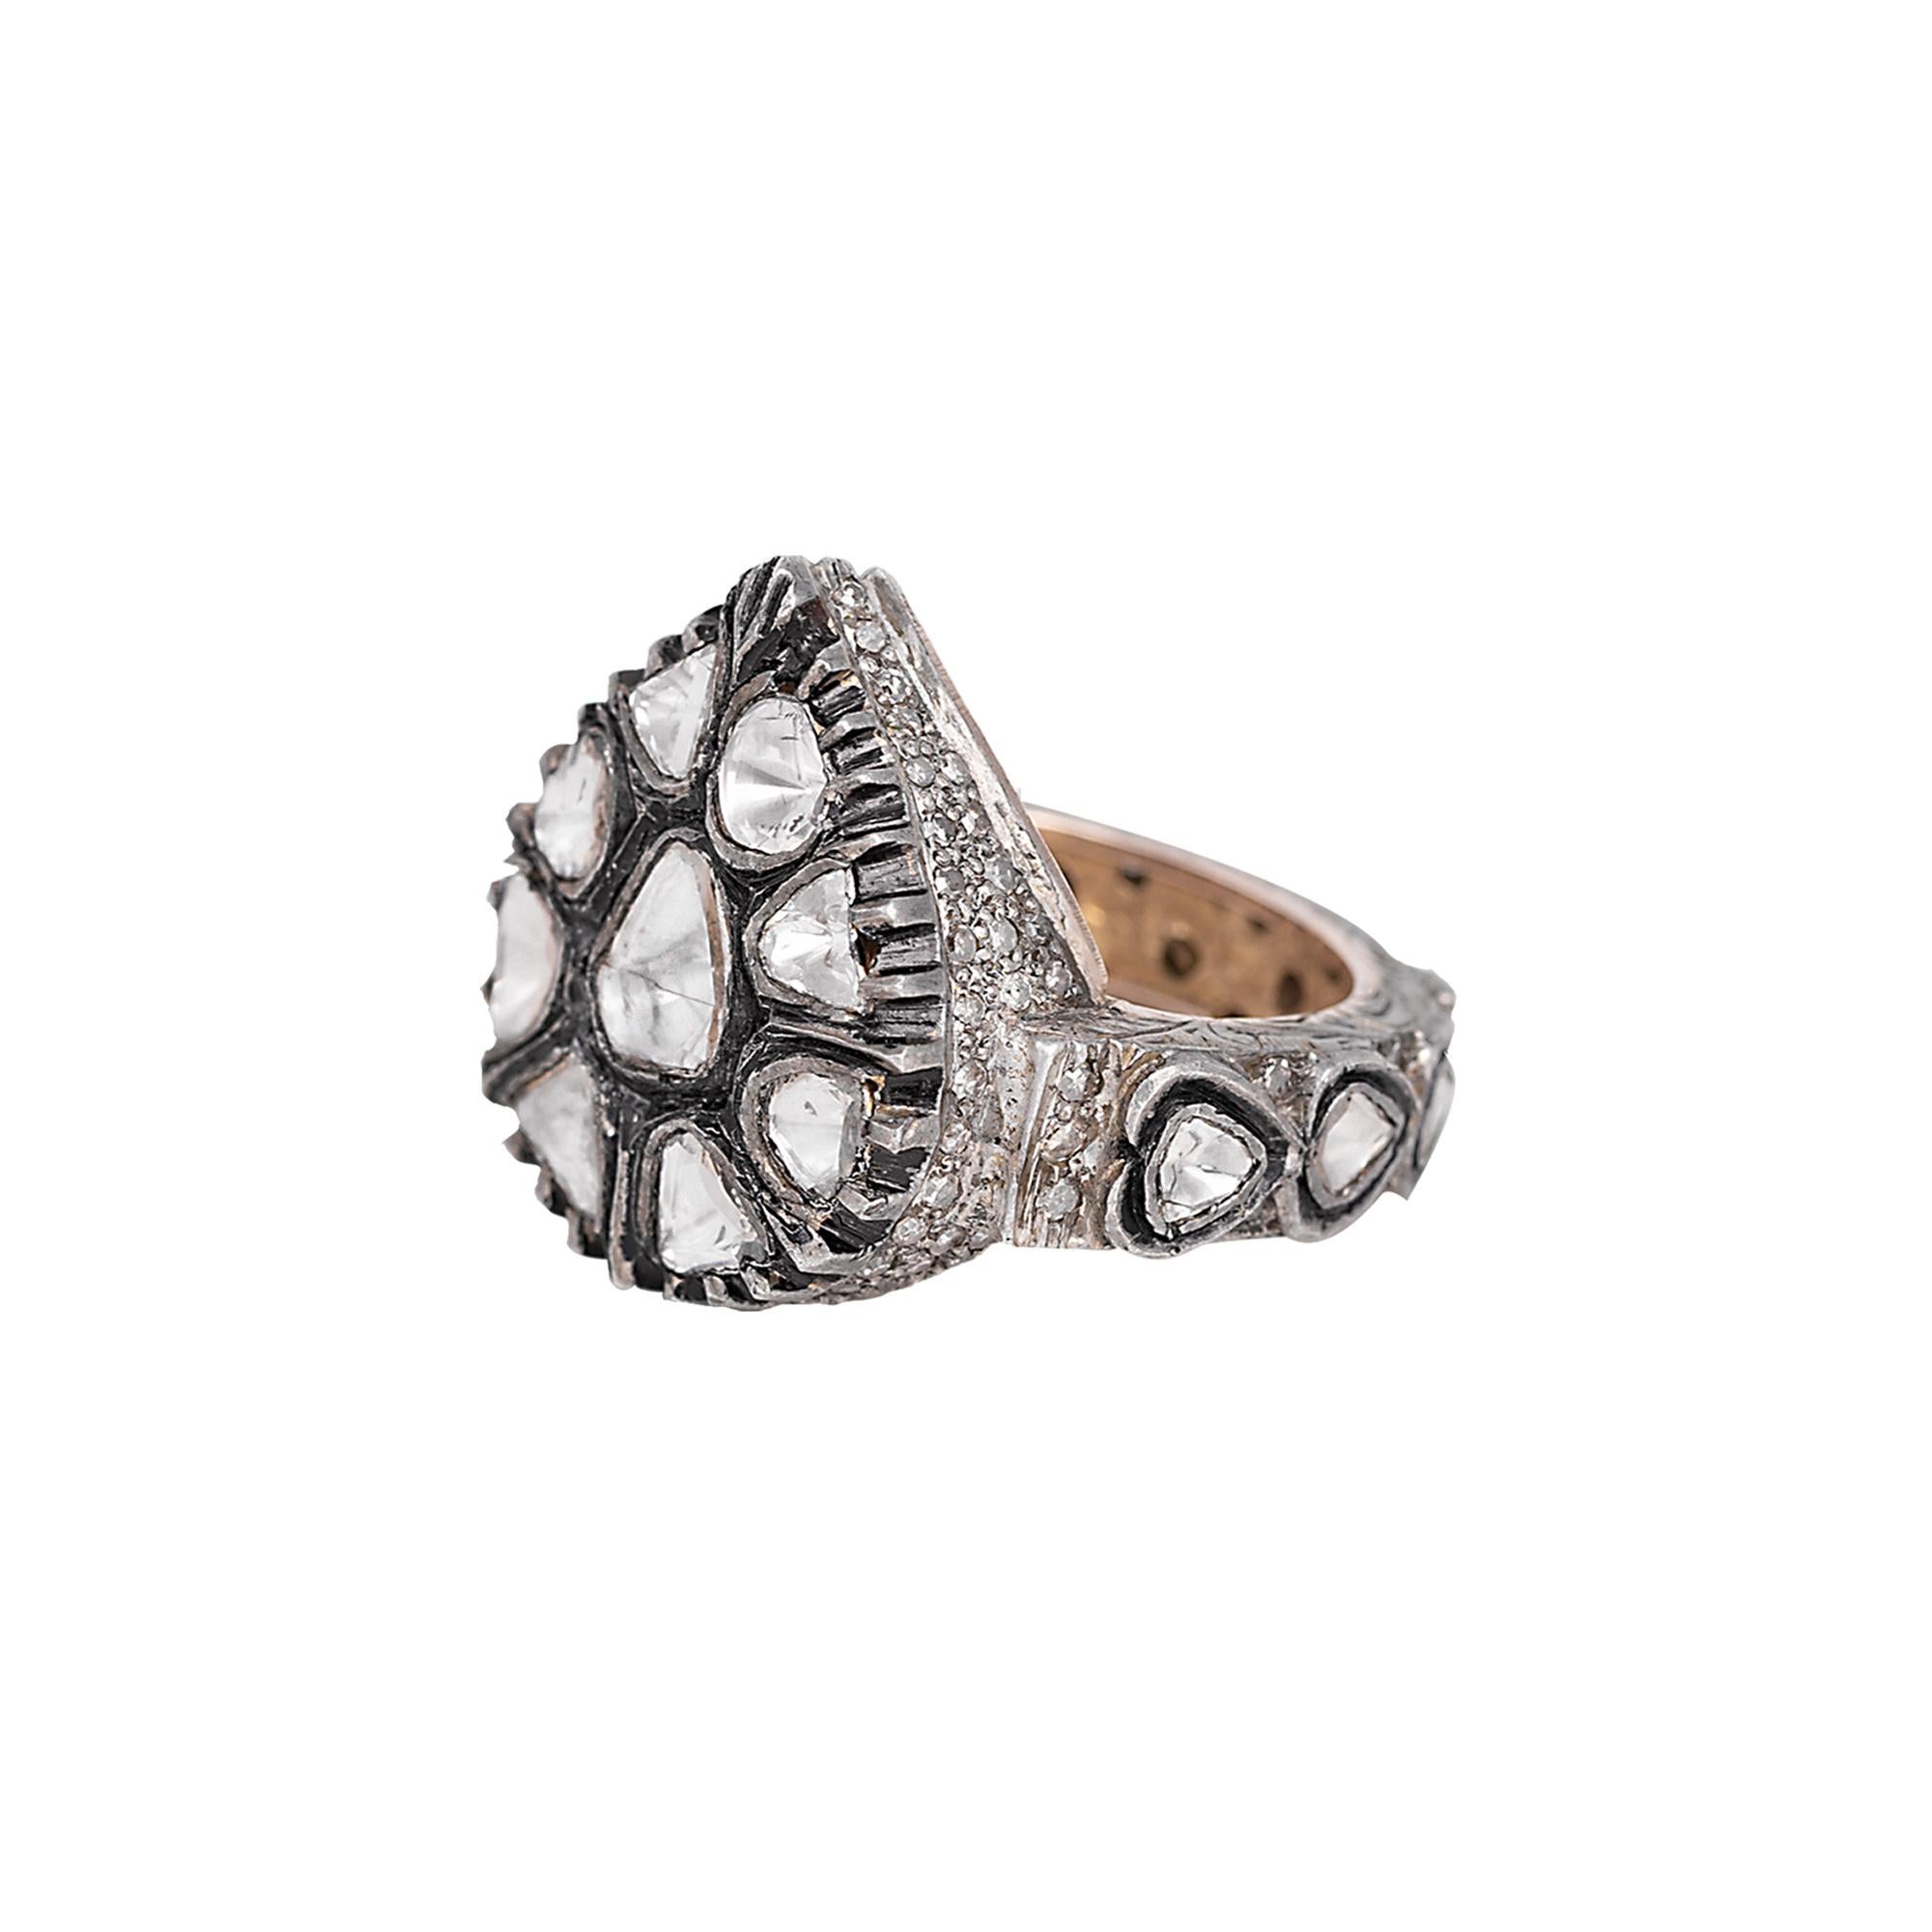 1.90 Carat Diamond Polki Handcrafted Antique Style Ring

This Victorian period art-deco atypical polki diamond ring is marvelous. The uneven triangle and U-cut flat polki diamond solitaires set in bezel setting surround the bigger center uneven pear